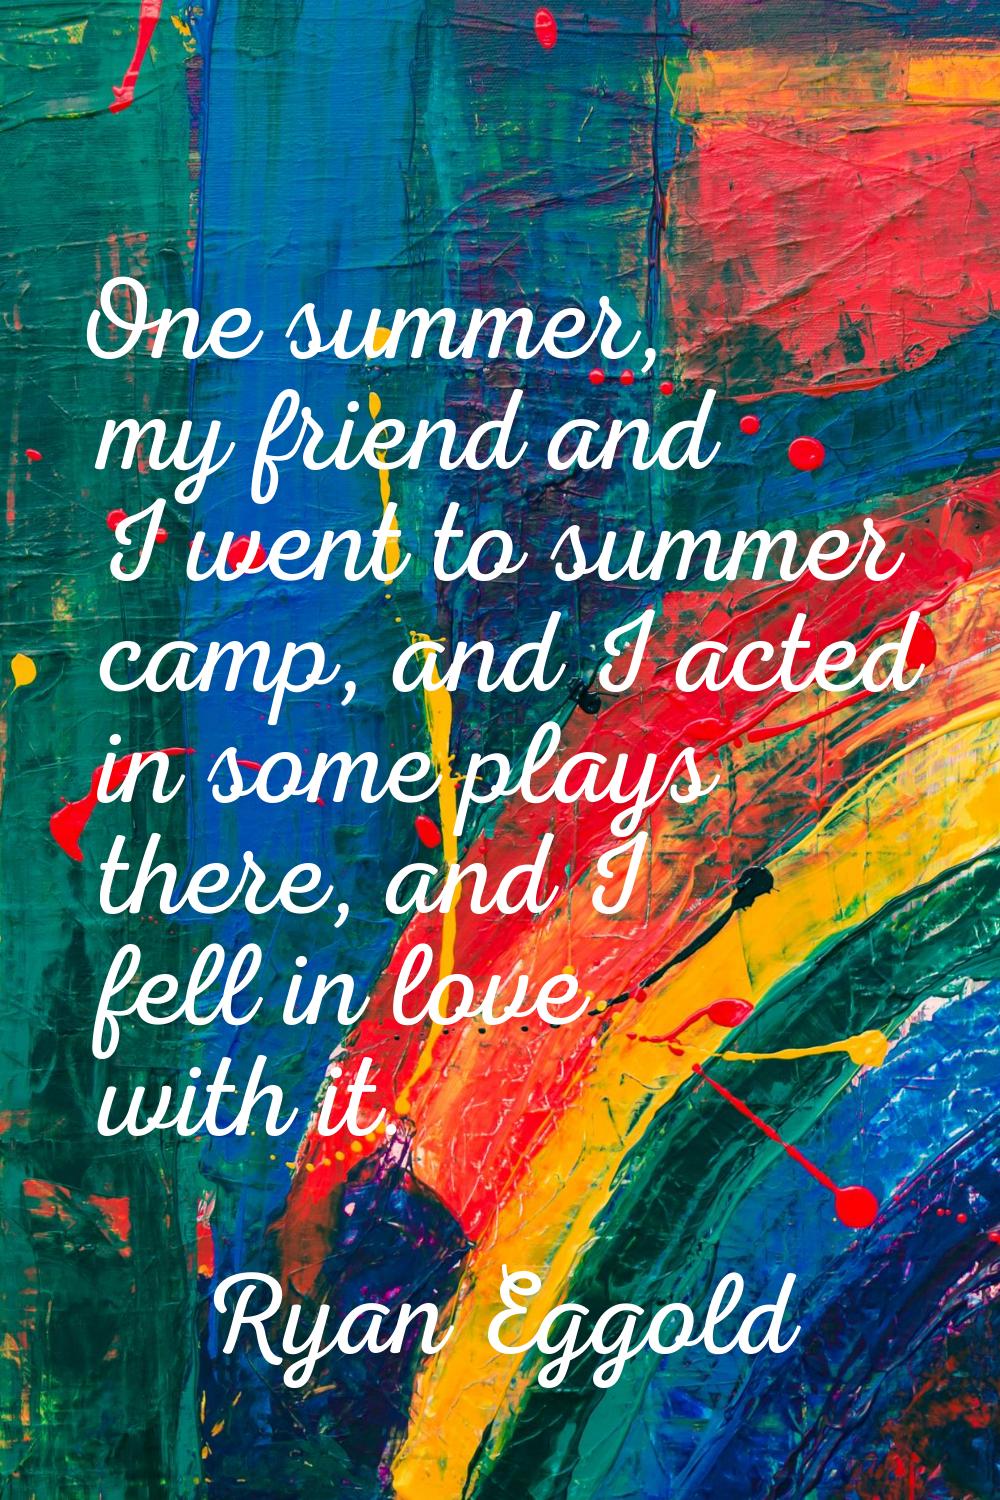 One summer, my friend and I went to summer camp, and I acted in some plays there, and I fell in lov